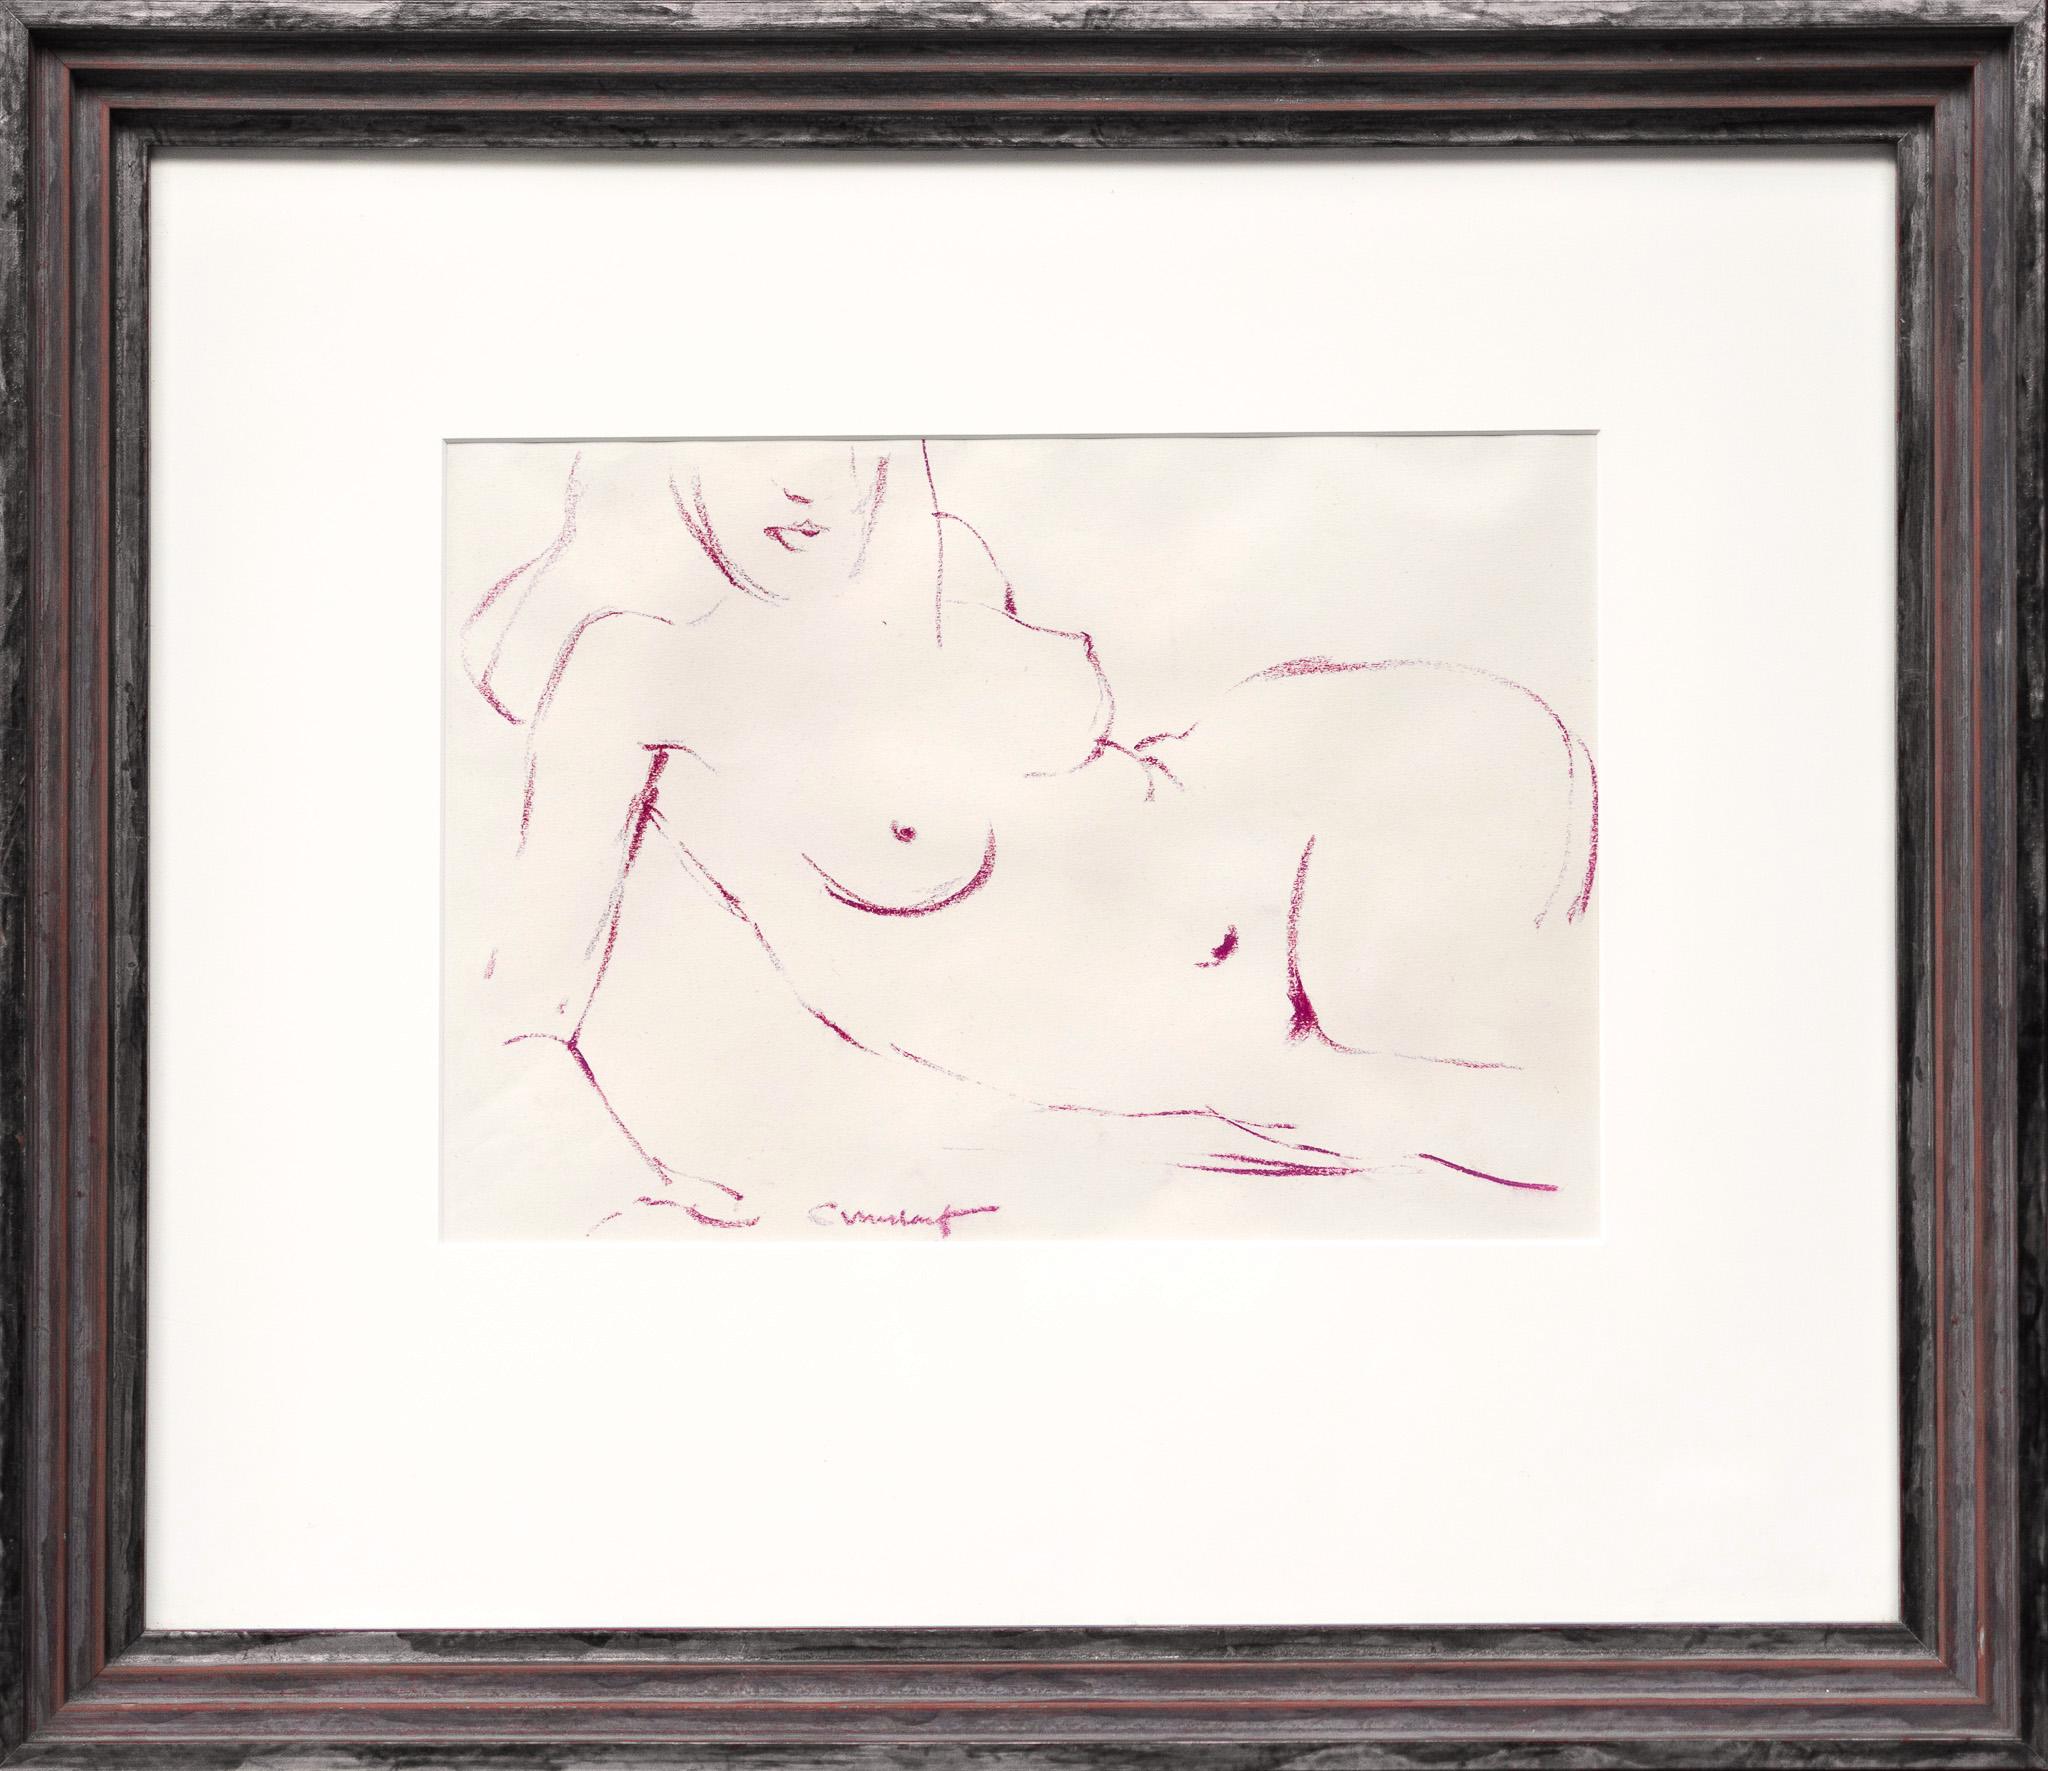 This drawing by Charles Umlauf depicts a woman's body in the nude. The piece is executed in conté crayon on paper and measures 9